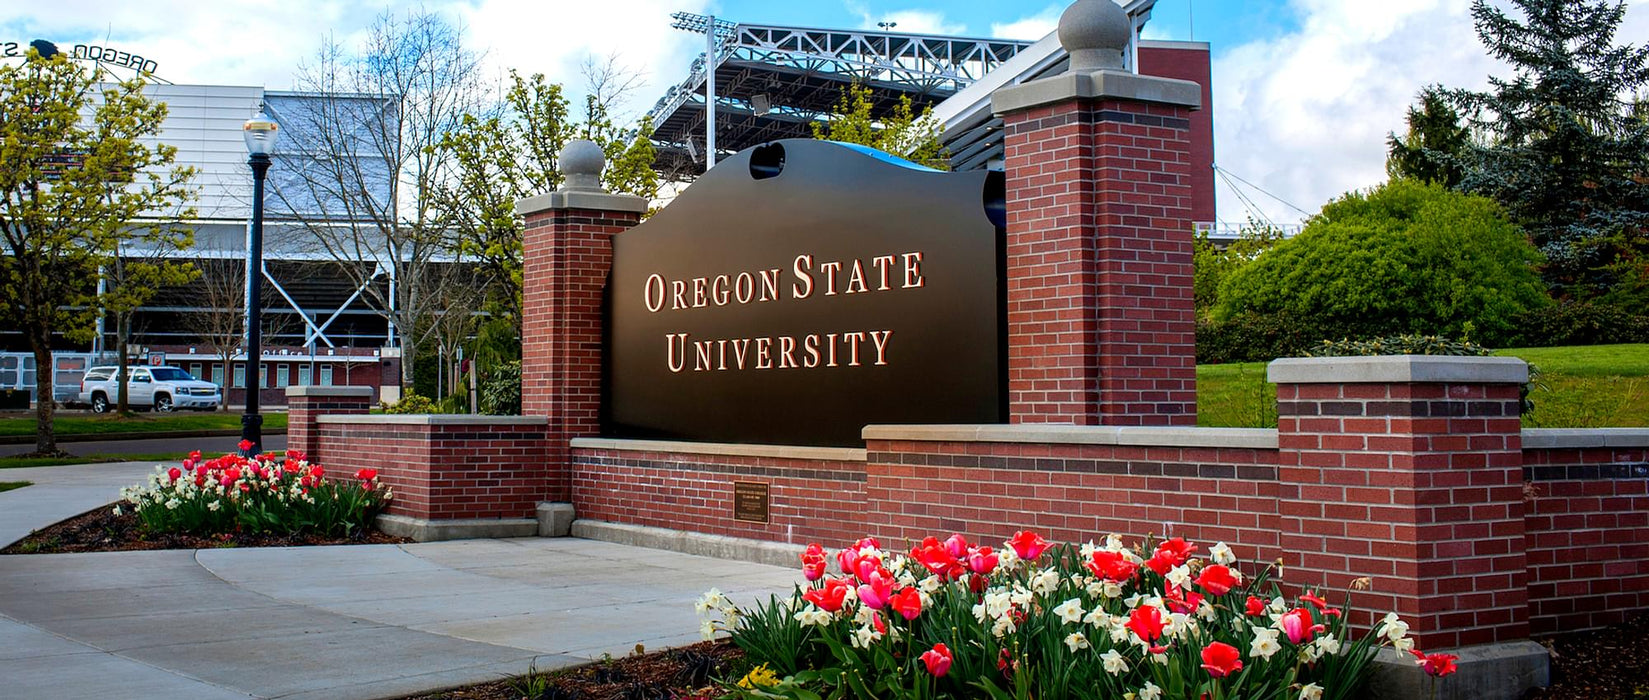 Bachelor of Arts - Marketing at Oregon State University - Corvallis: Tuition: $32,790.00 USD/year (Scholarship Available)